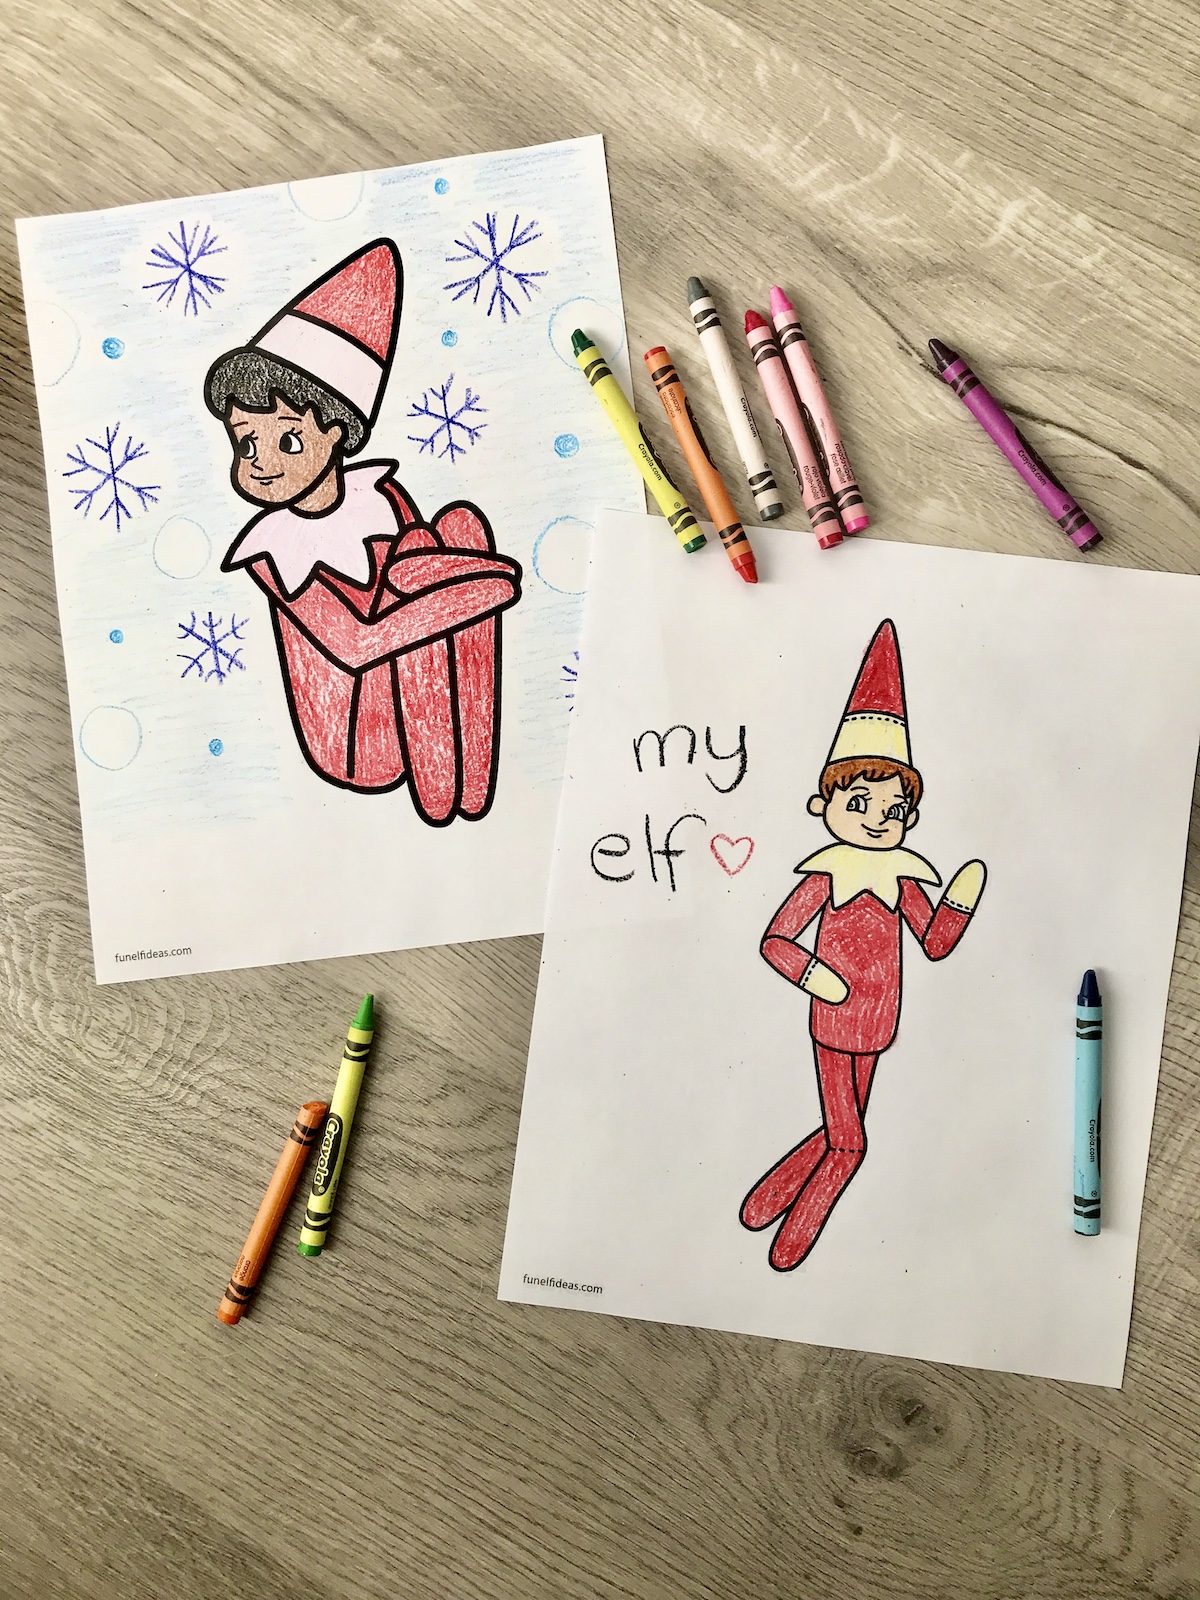 two elf on the shelf coloring pages that have been colored with crayons